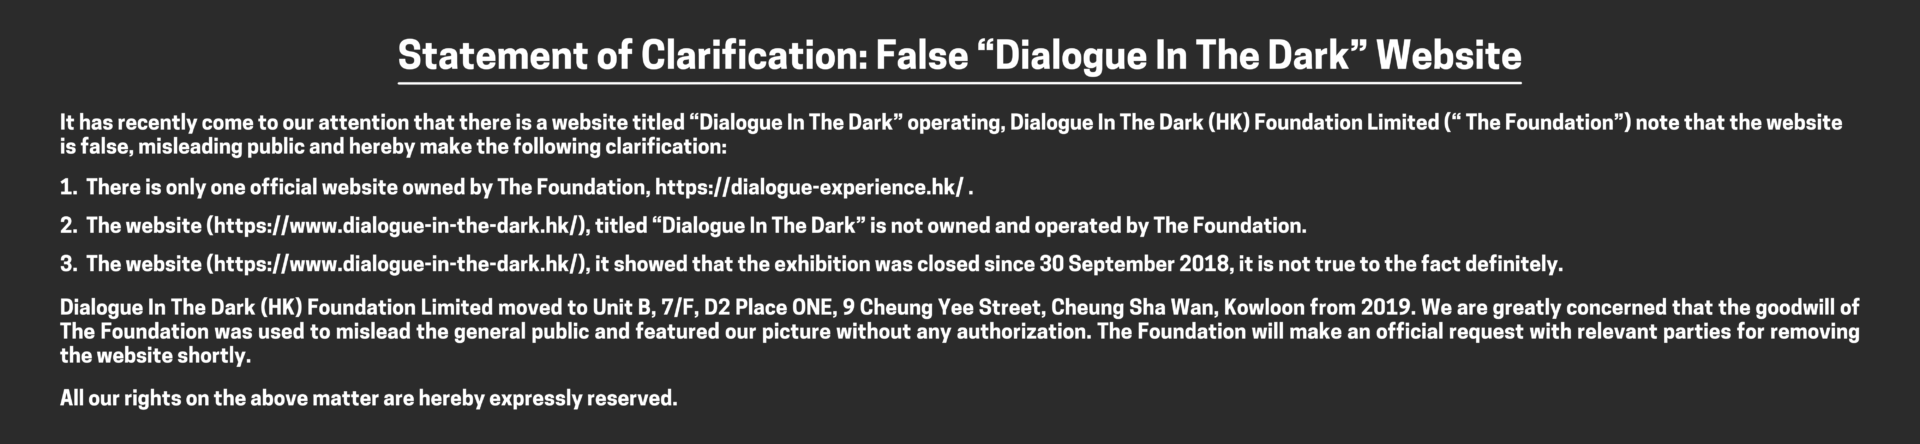 Statement of Clarification: False “Dialogue In The Dark” Website